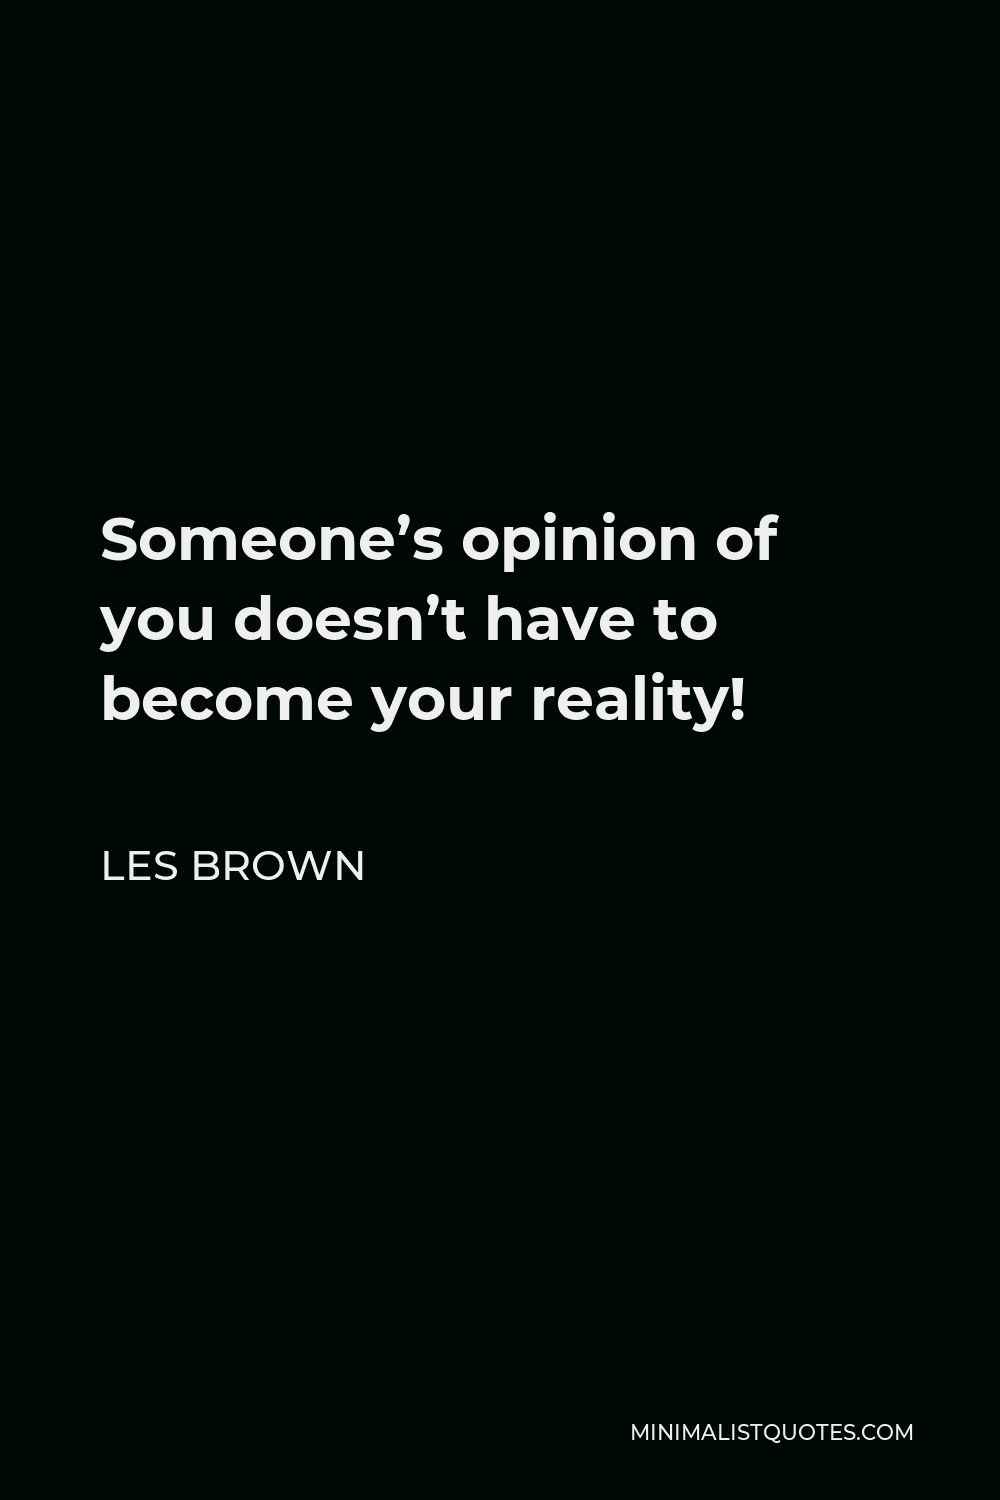 Les Brown Quote: Someone’s opinion of you doesn’t have to become your ...